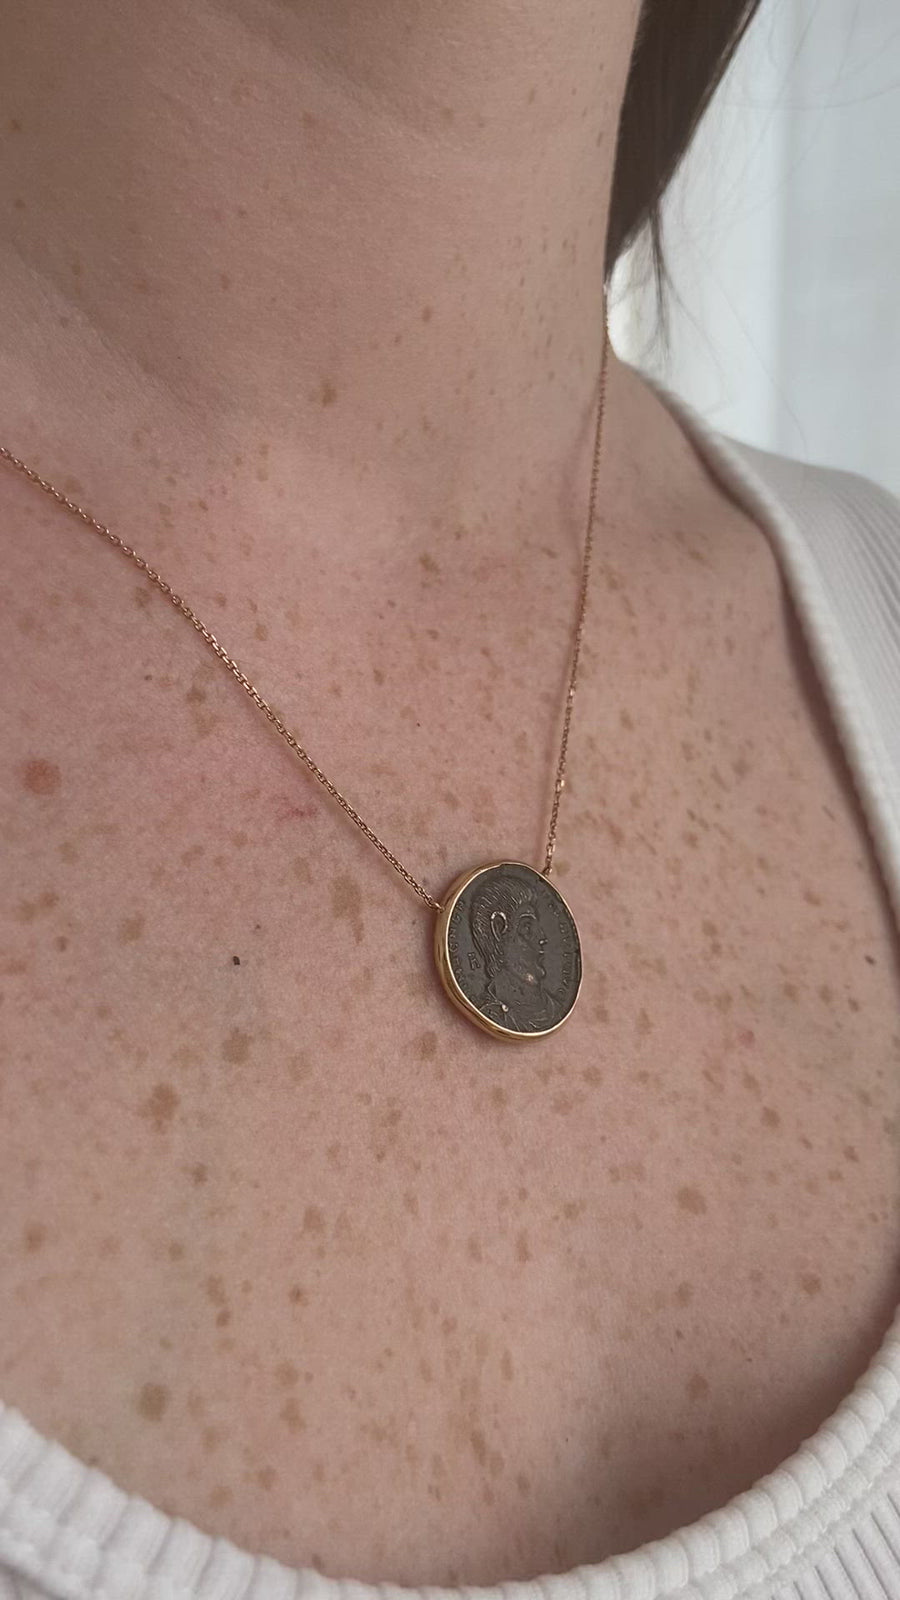 Magnence Roman coin necklace